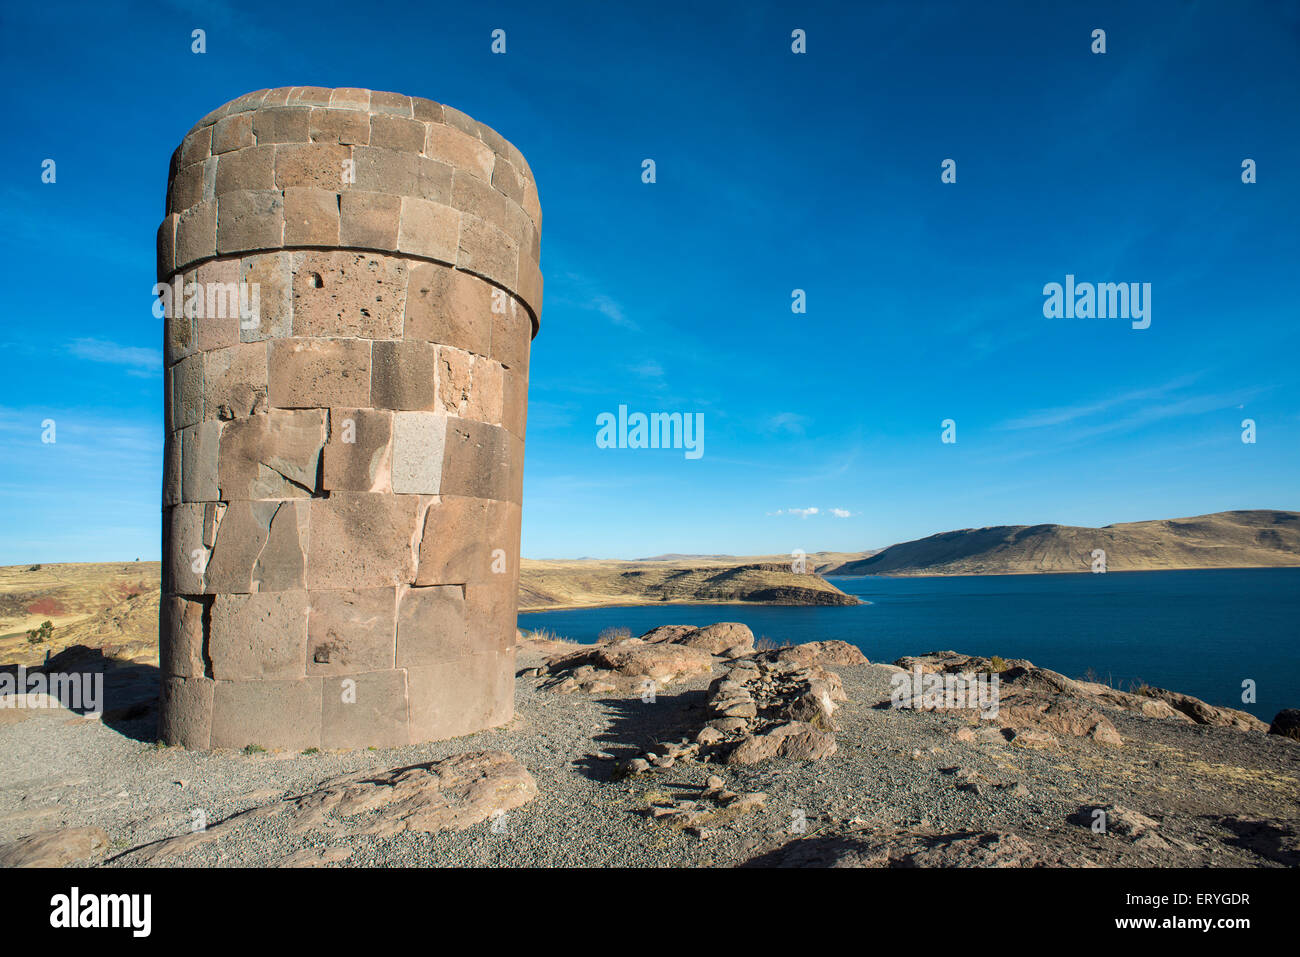 Grave towers of Sillustani, also Chullpas, funeral towers of the Aymara Indians, Colla culture, Umayo Lake, Sillustani Stock Photo